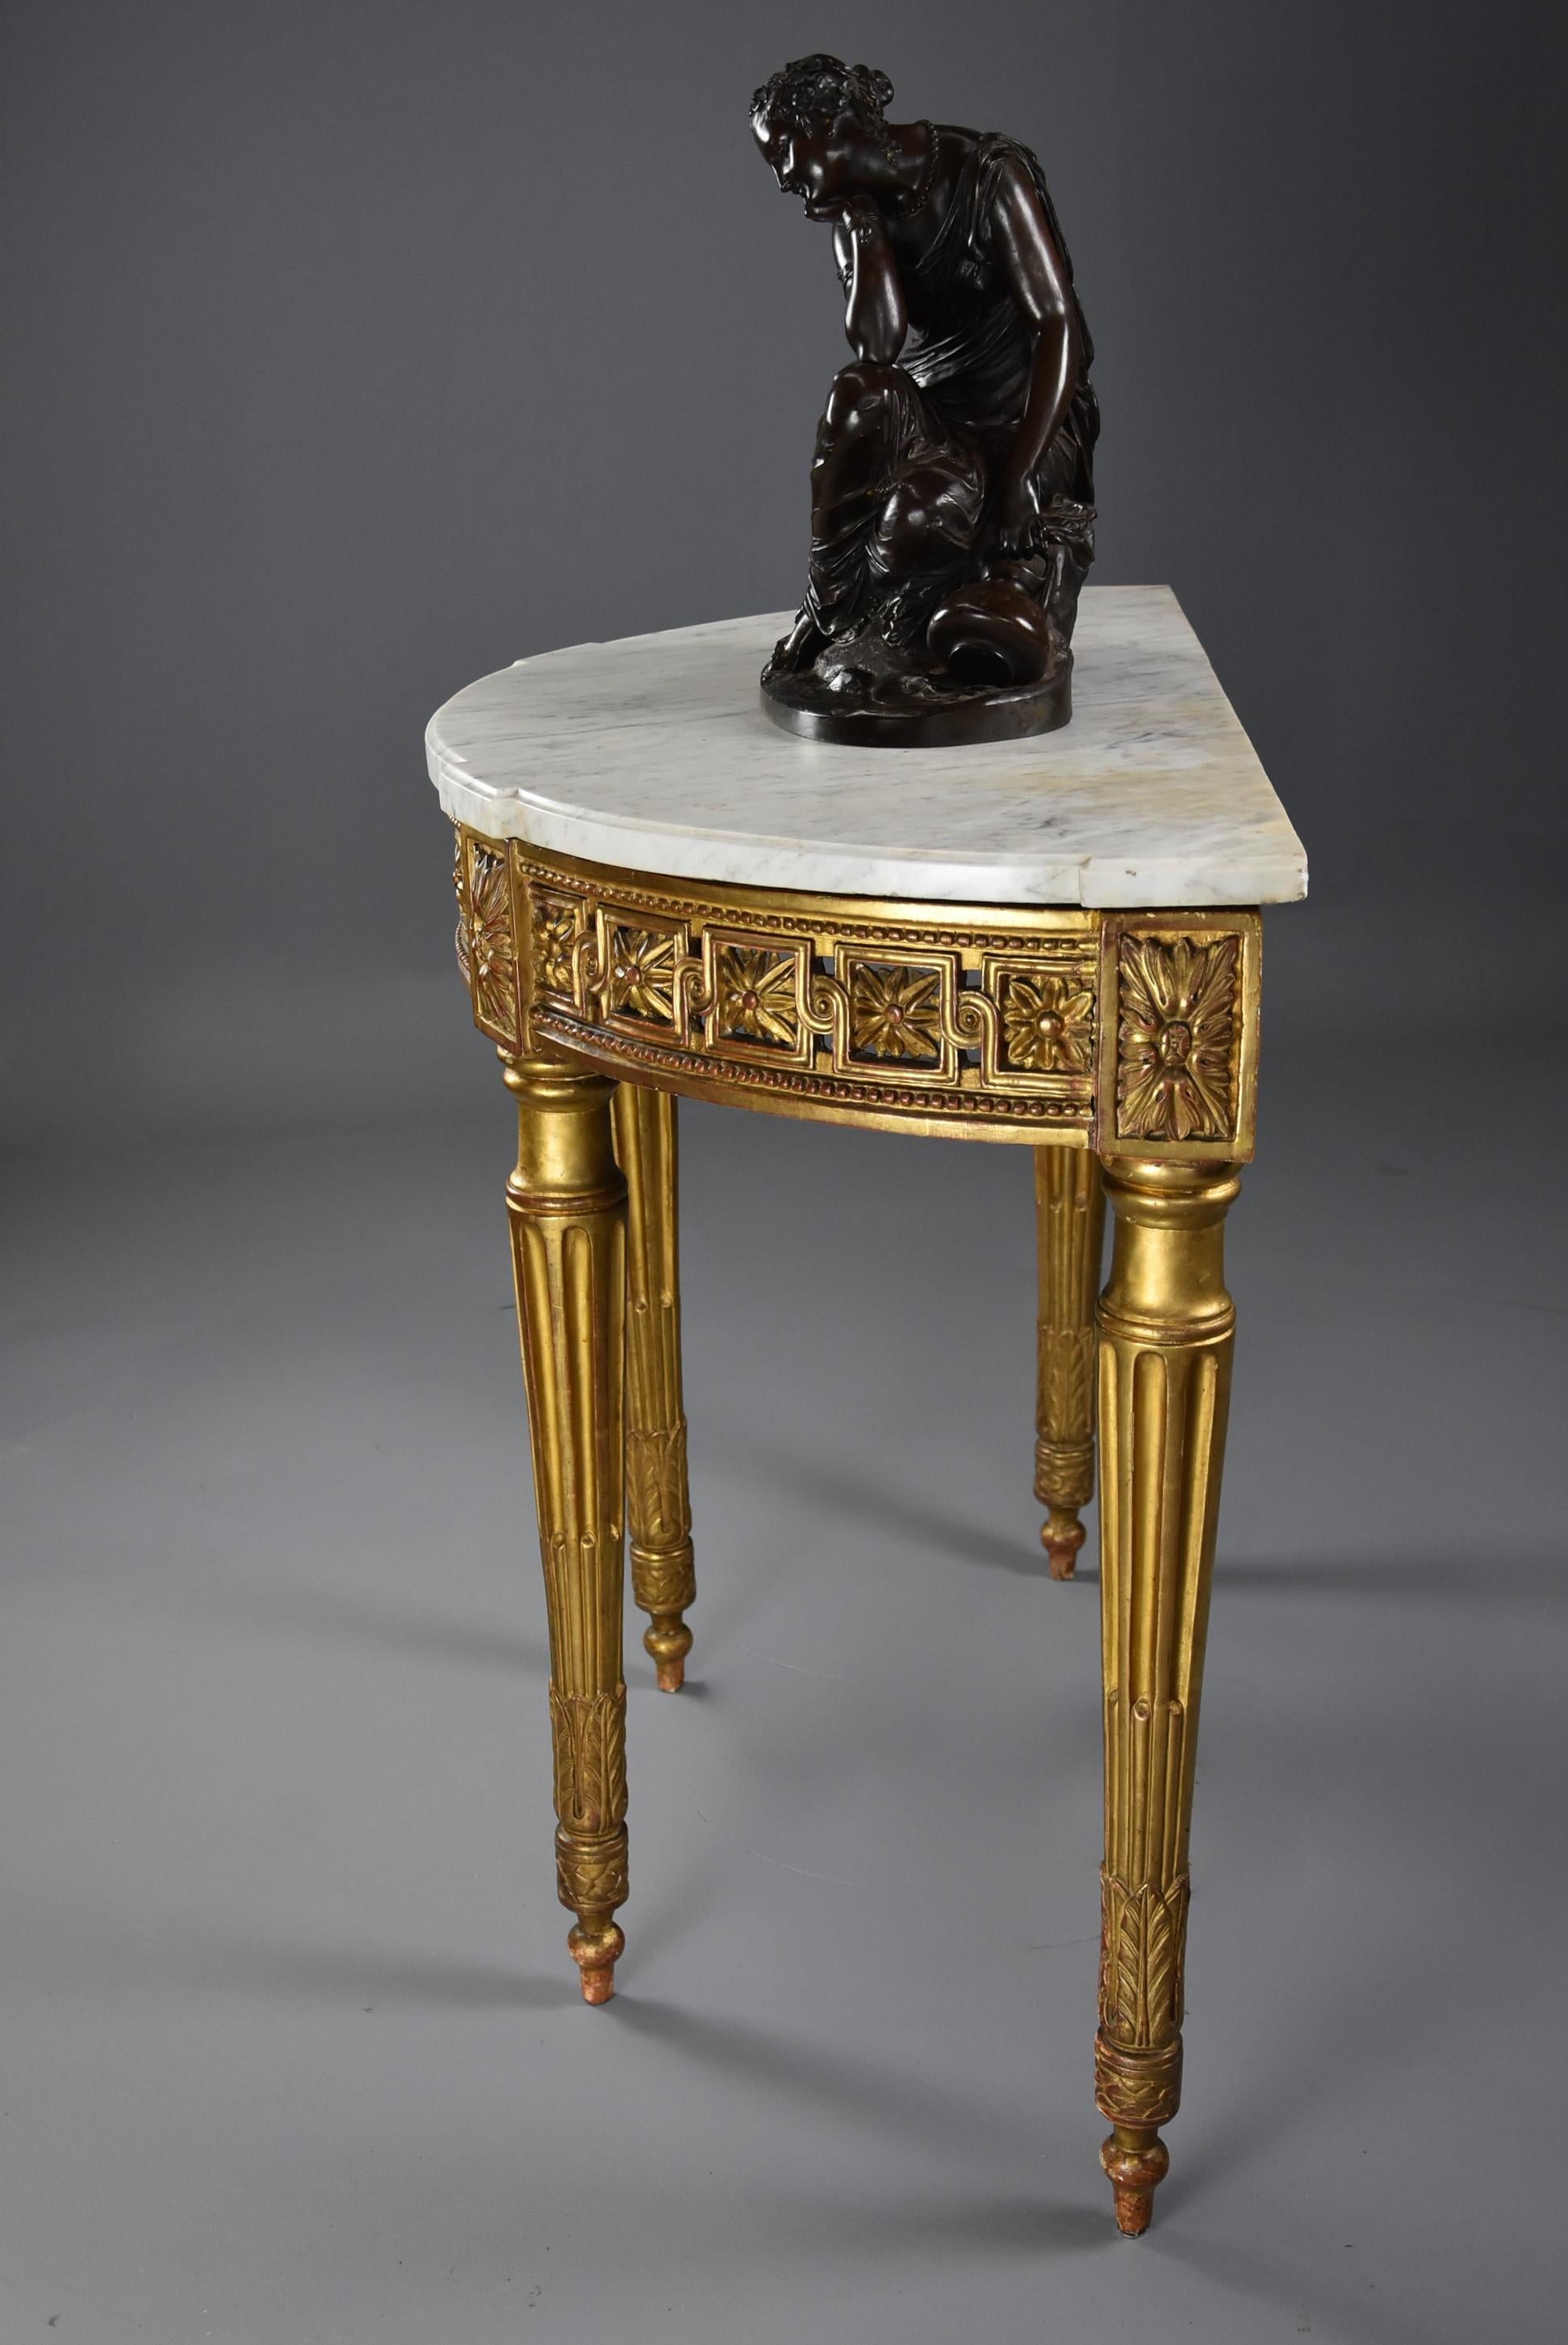 Highly Decorative 19th Century French Demilune Gilt Console Table For Sale 3